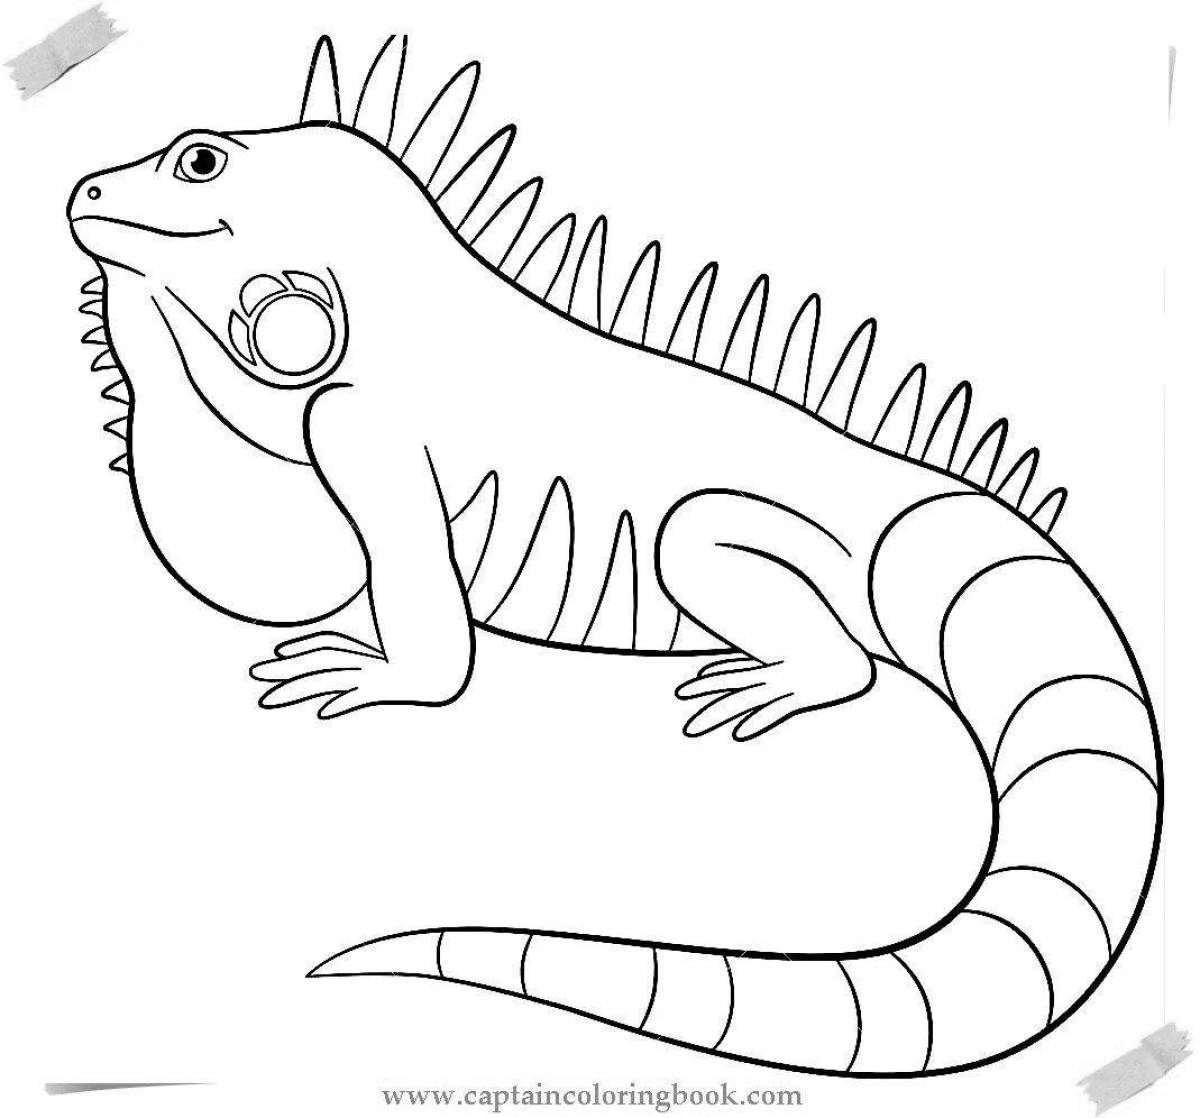 Outstanding iguana coloring page for kids